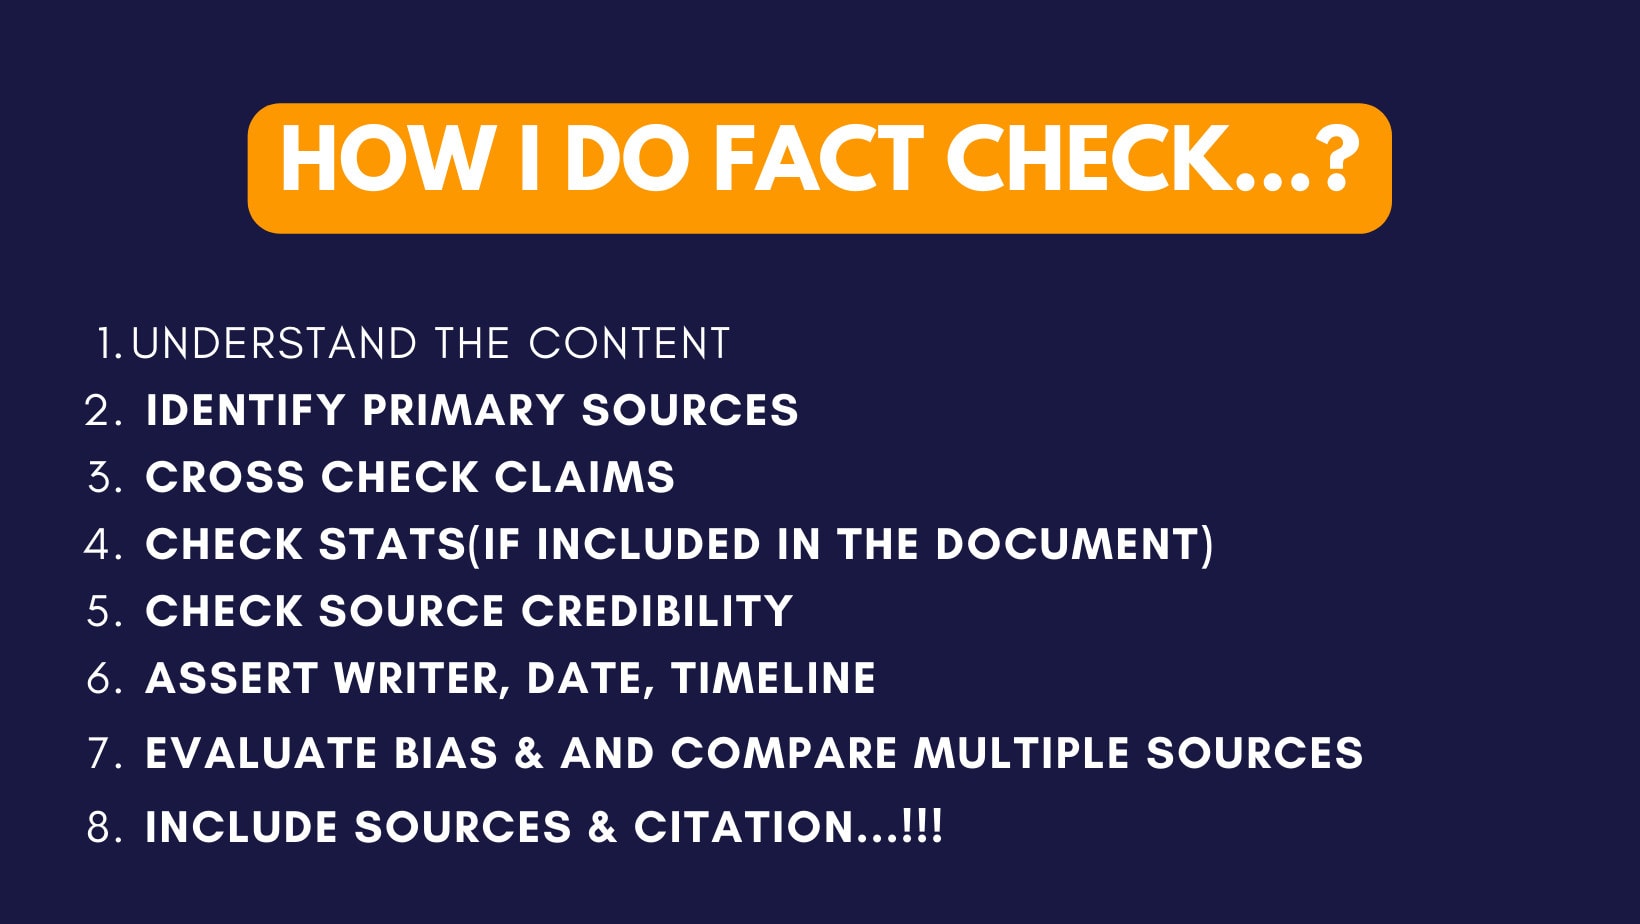 Cross-checking Sources of Information